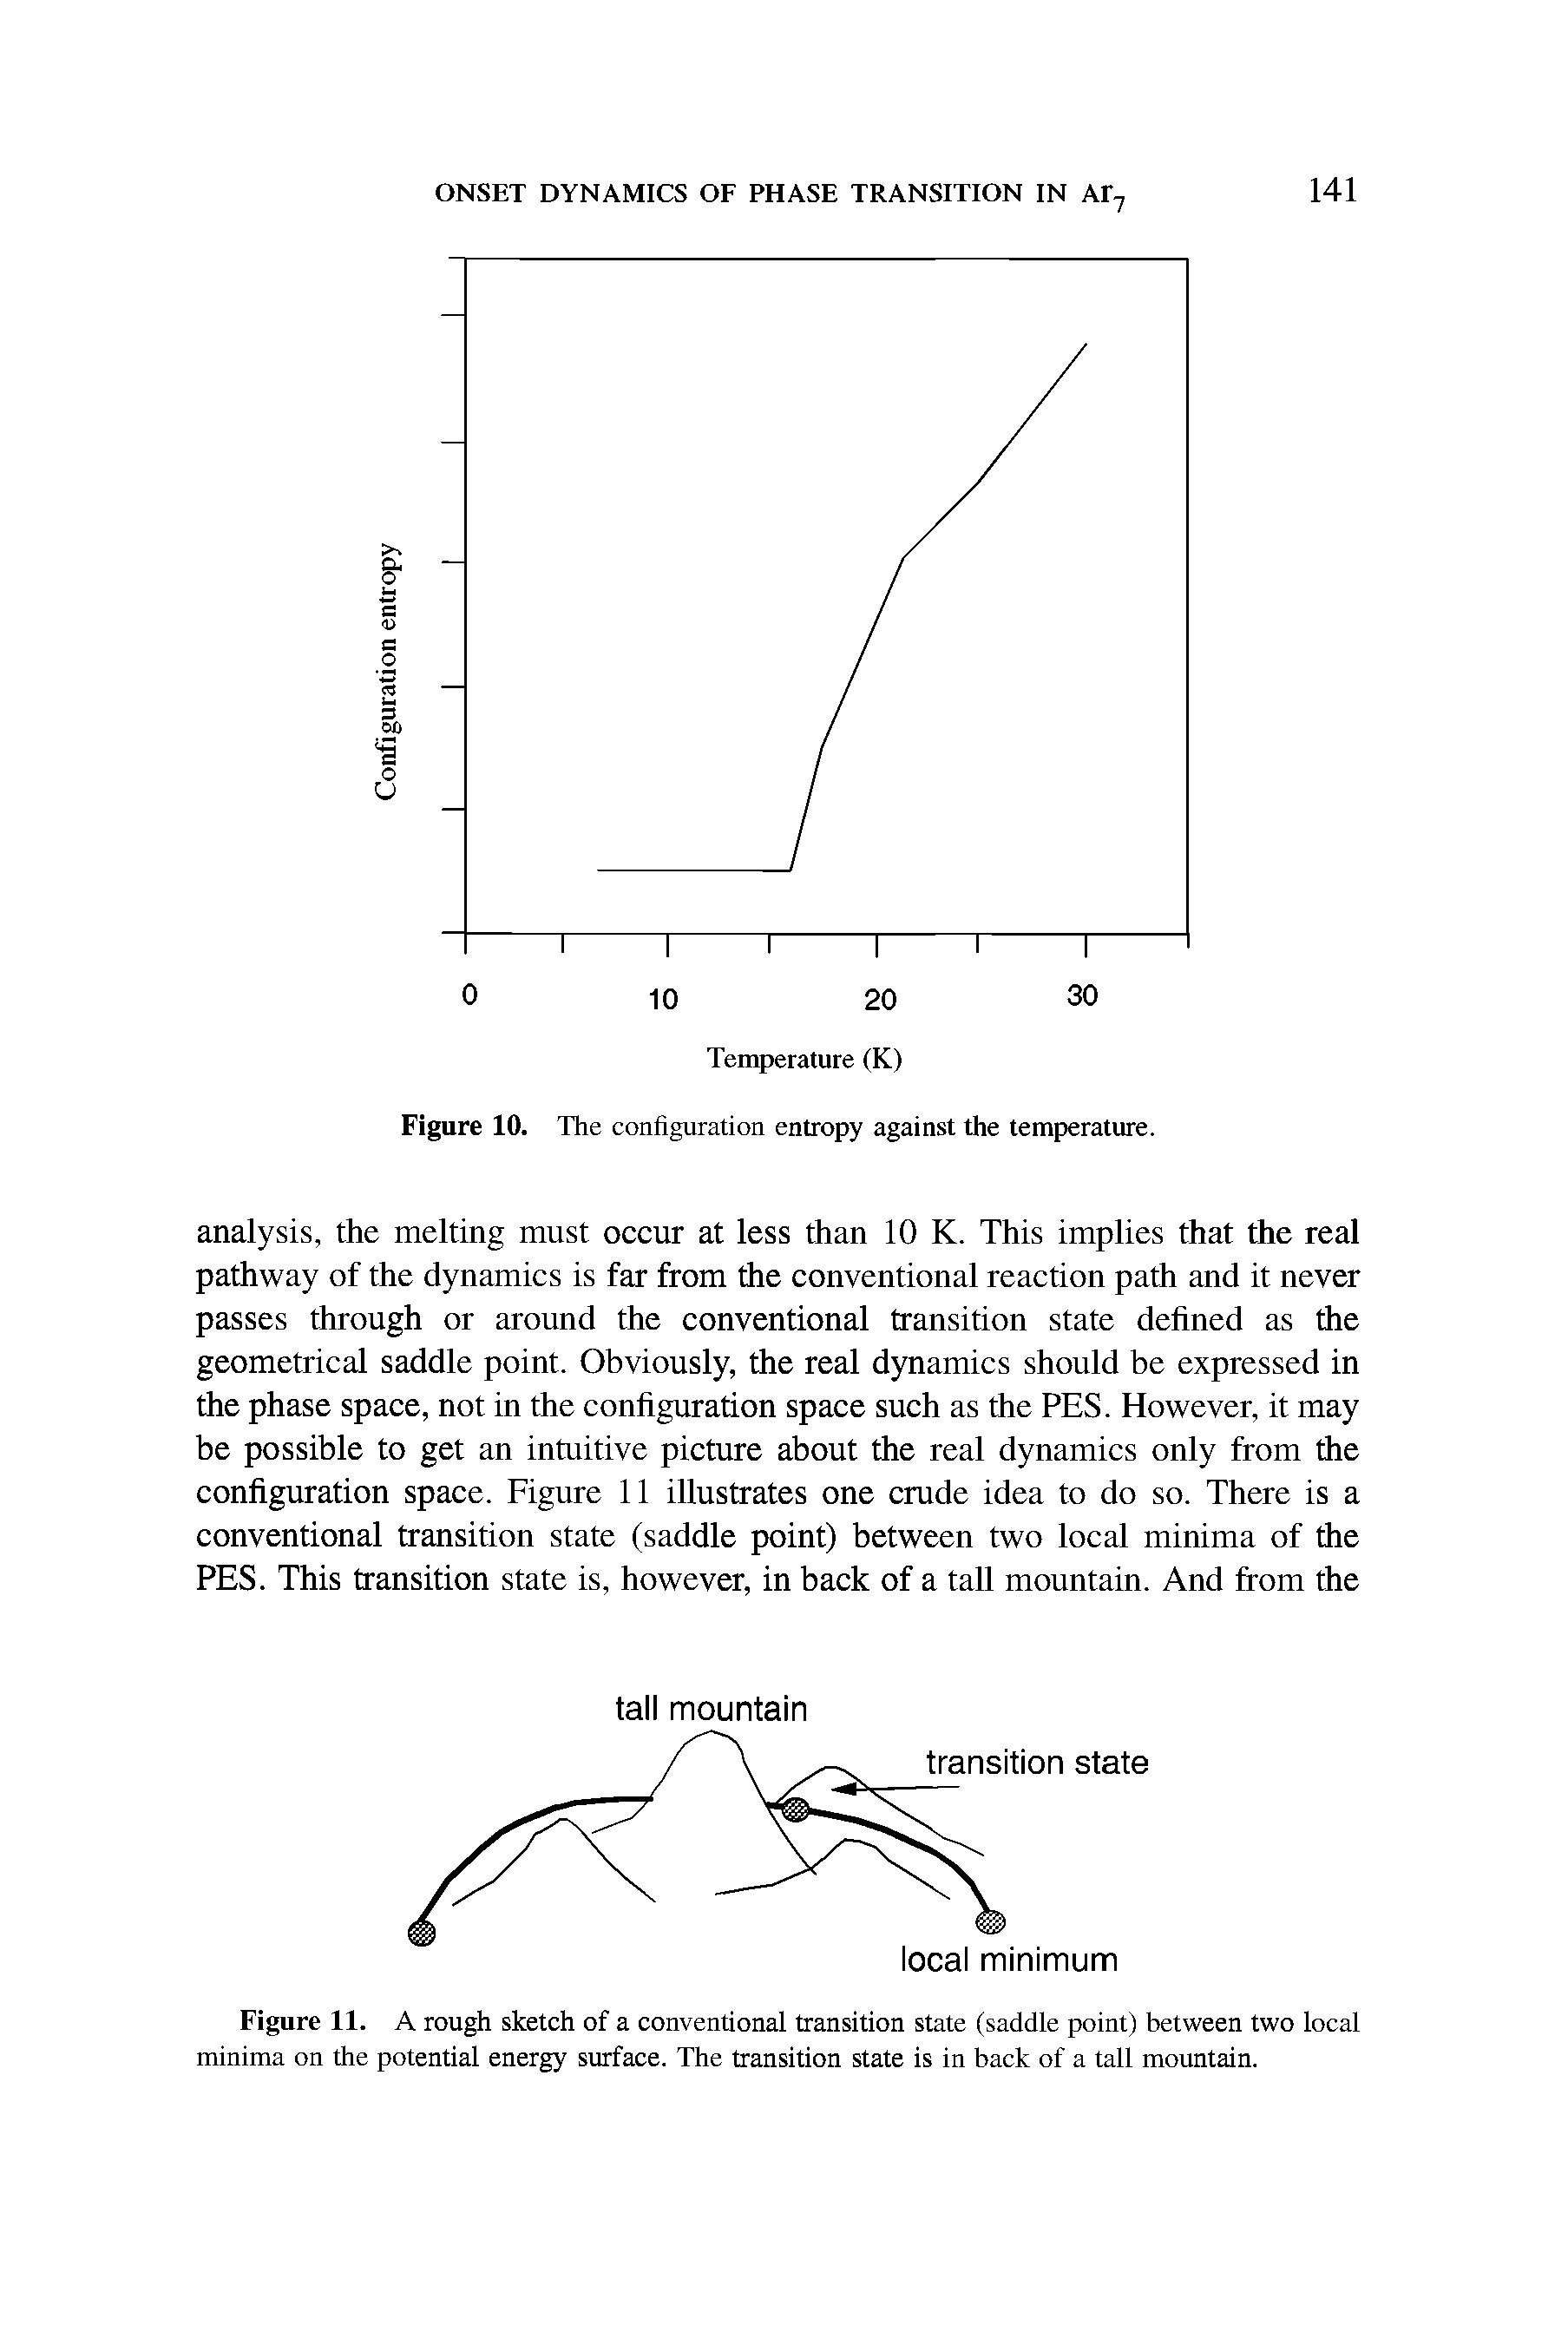 Figure 11. A rough sketch of a conventional transition state (saddle point) between two local minima on the potential energy surface. The transition state is in back of a tall mountain.